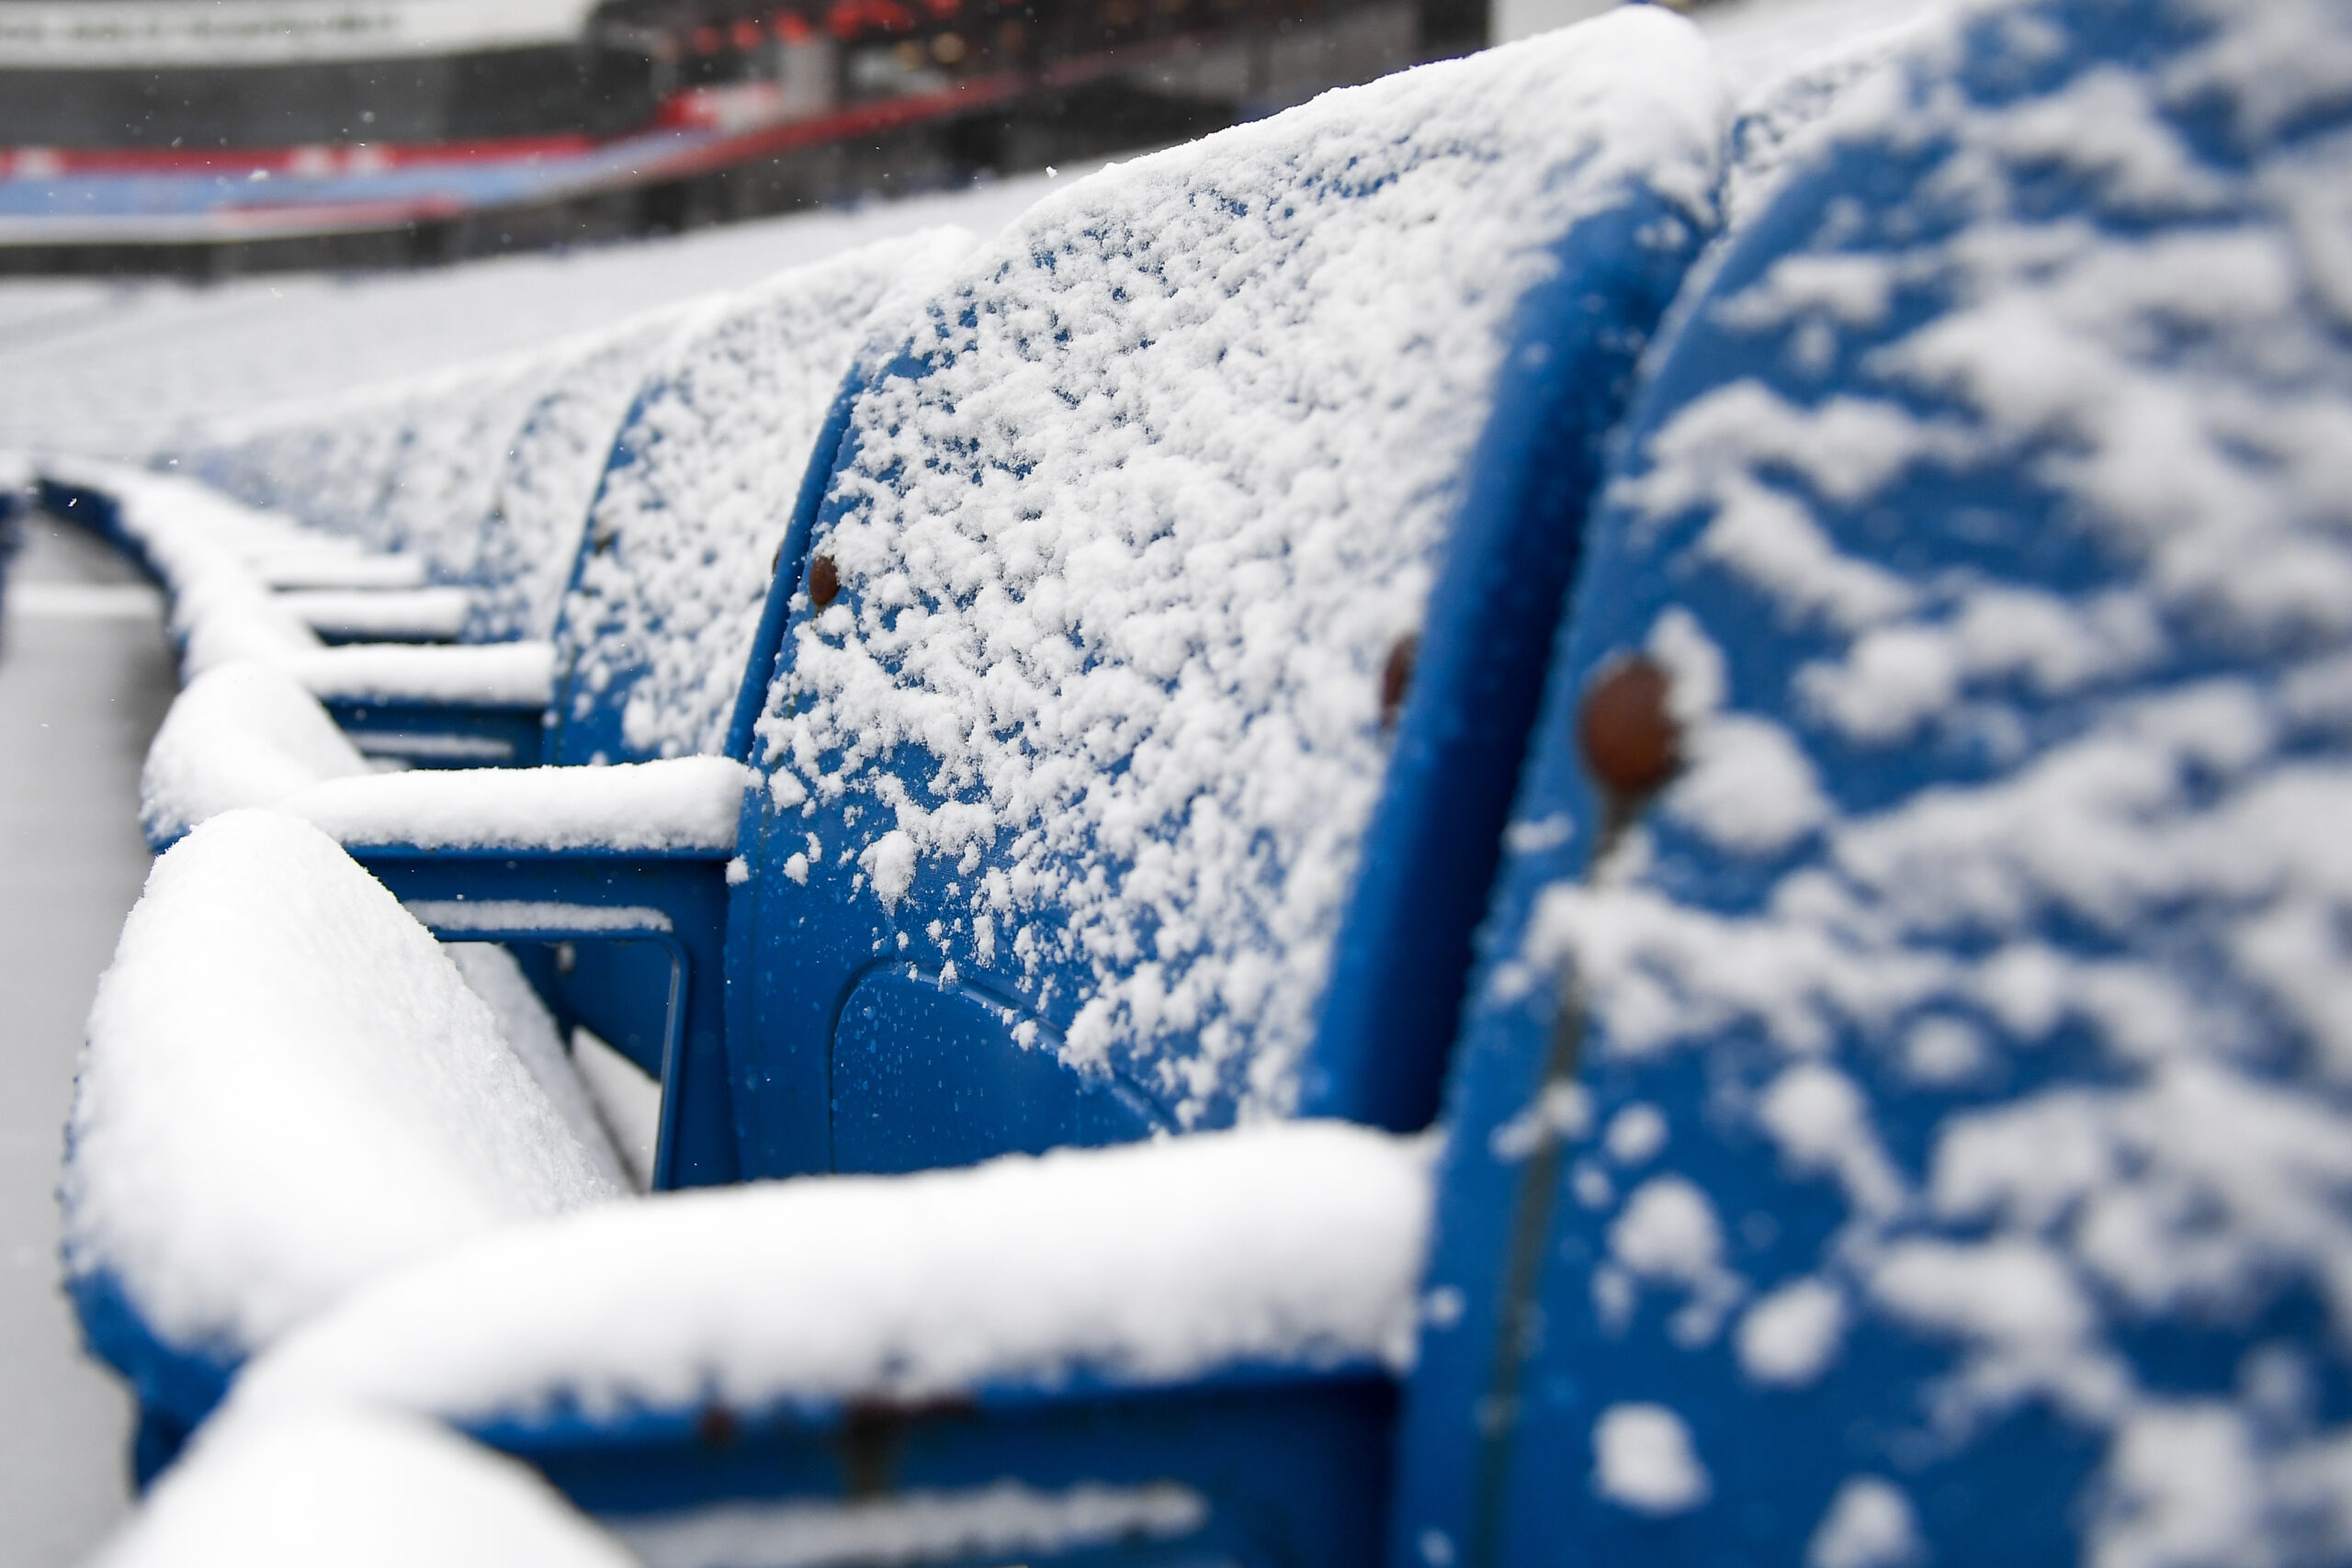 Browns-Bills Week 11 game moved to Detroit's Ford Field due to snowstorm